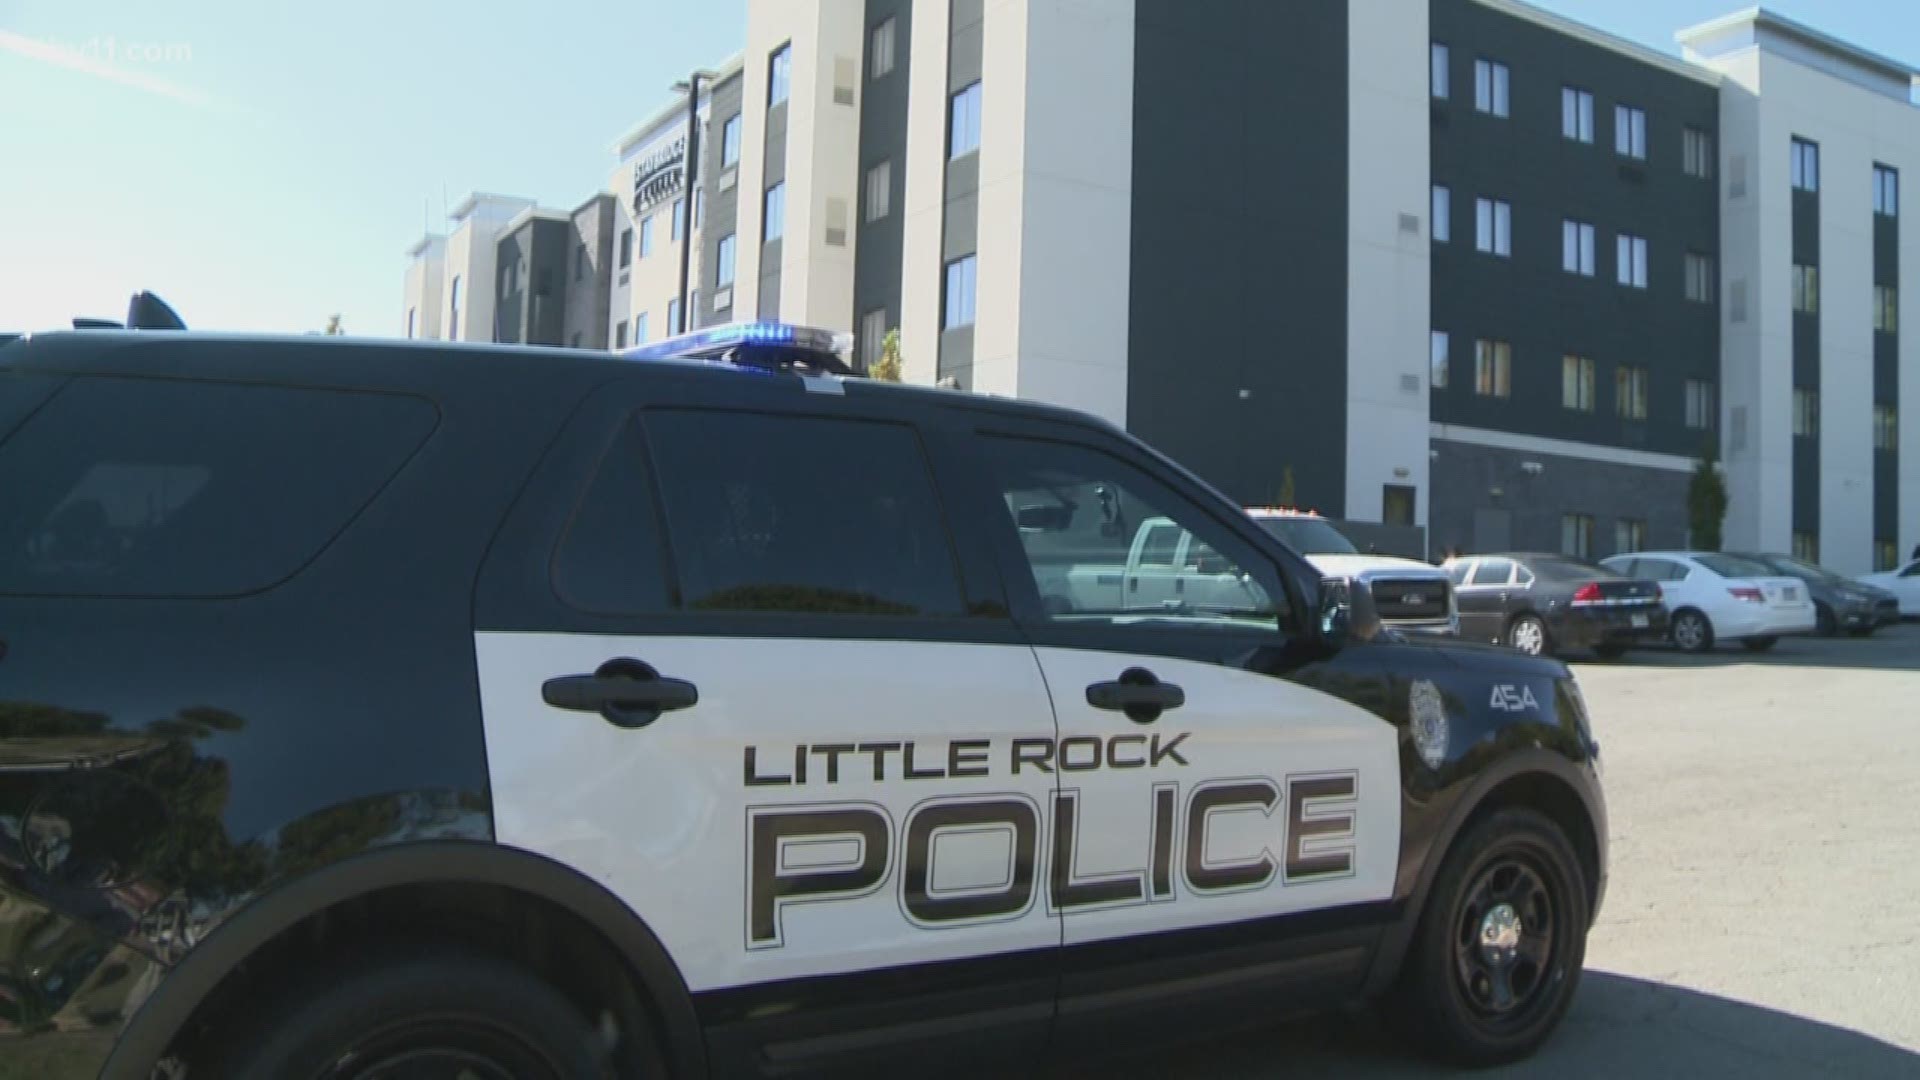 Police say shots were fired during a reported party at the hotel.